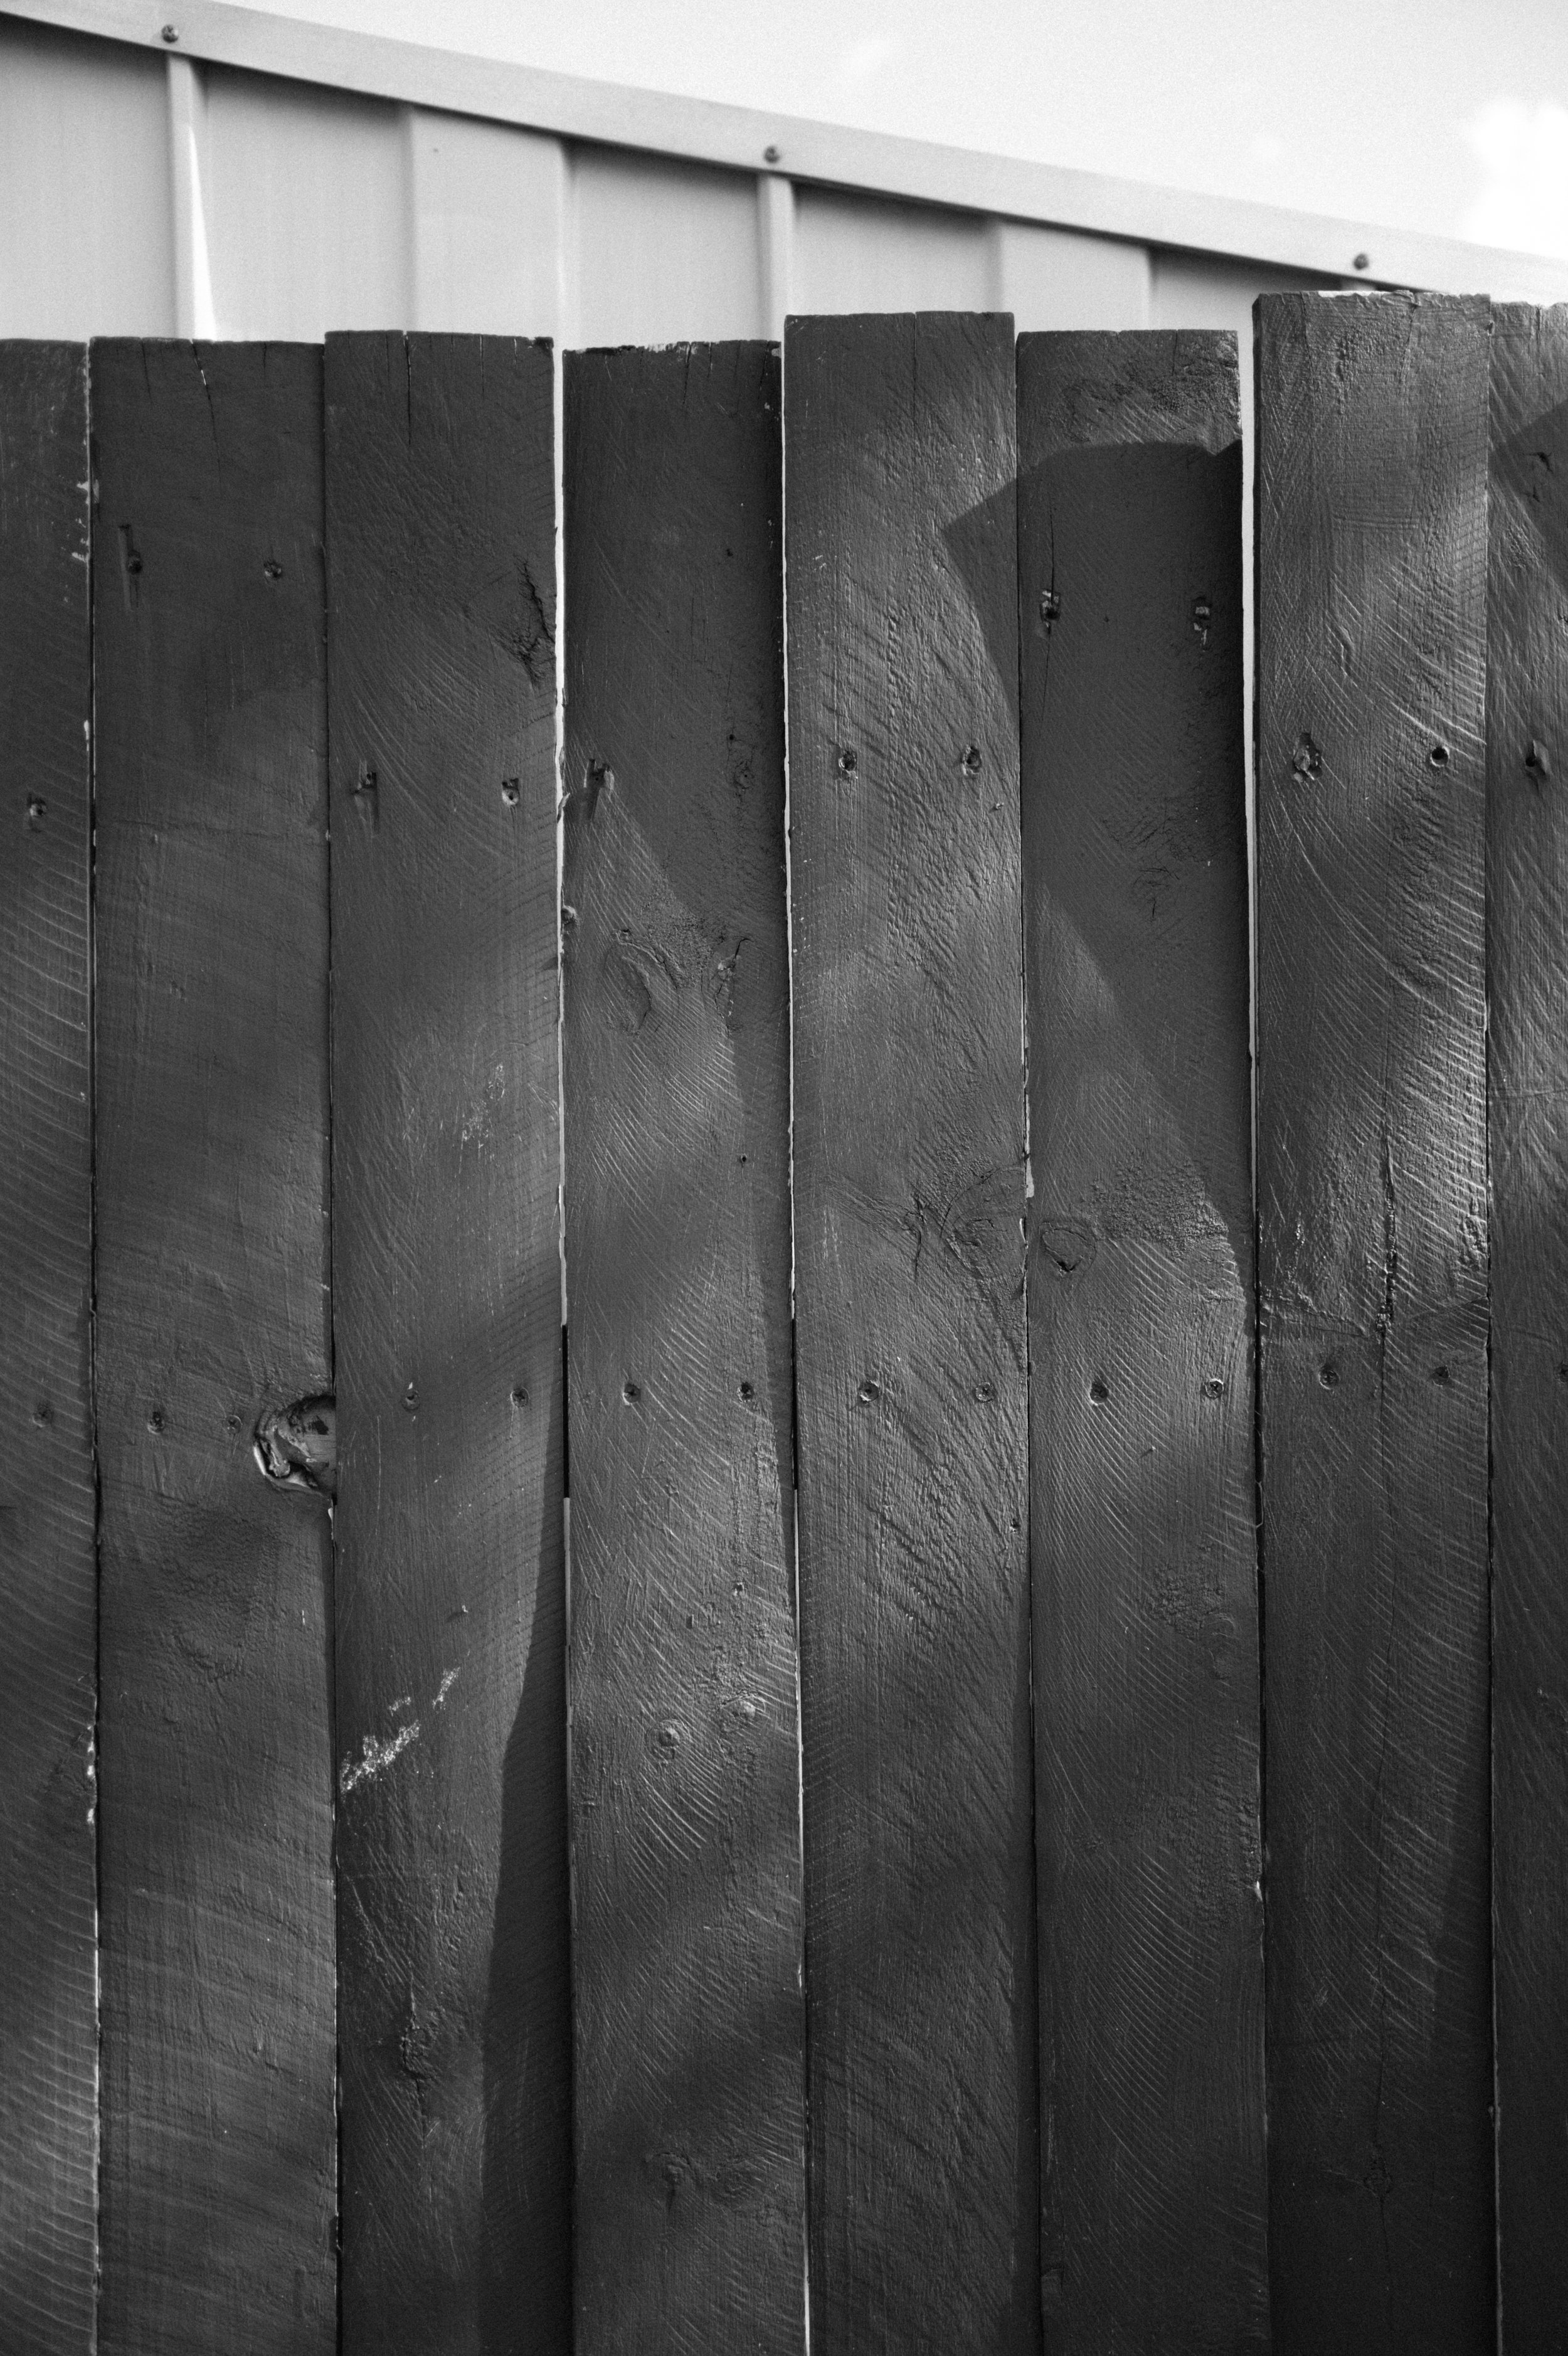 Site material texture/composition IV